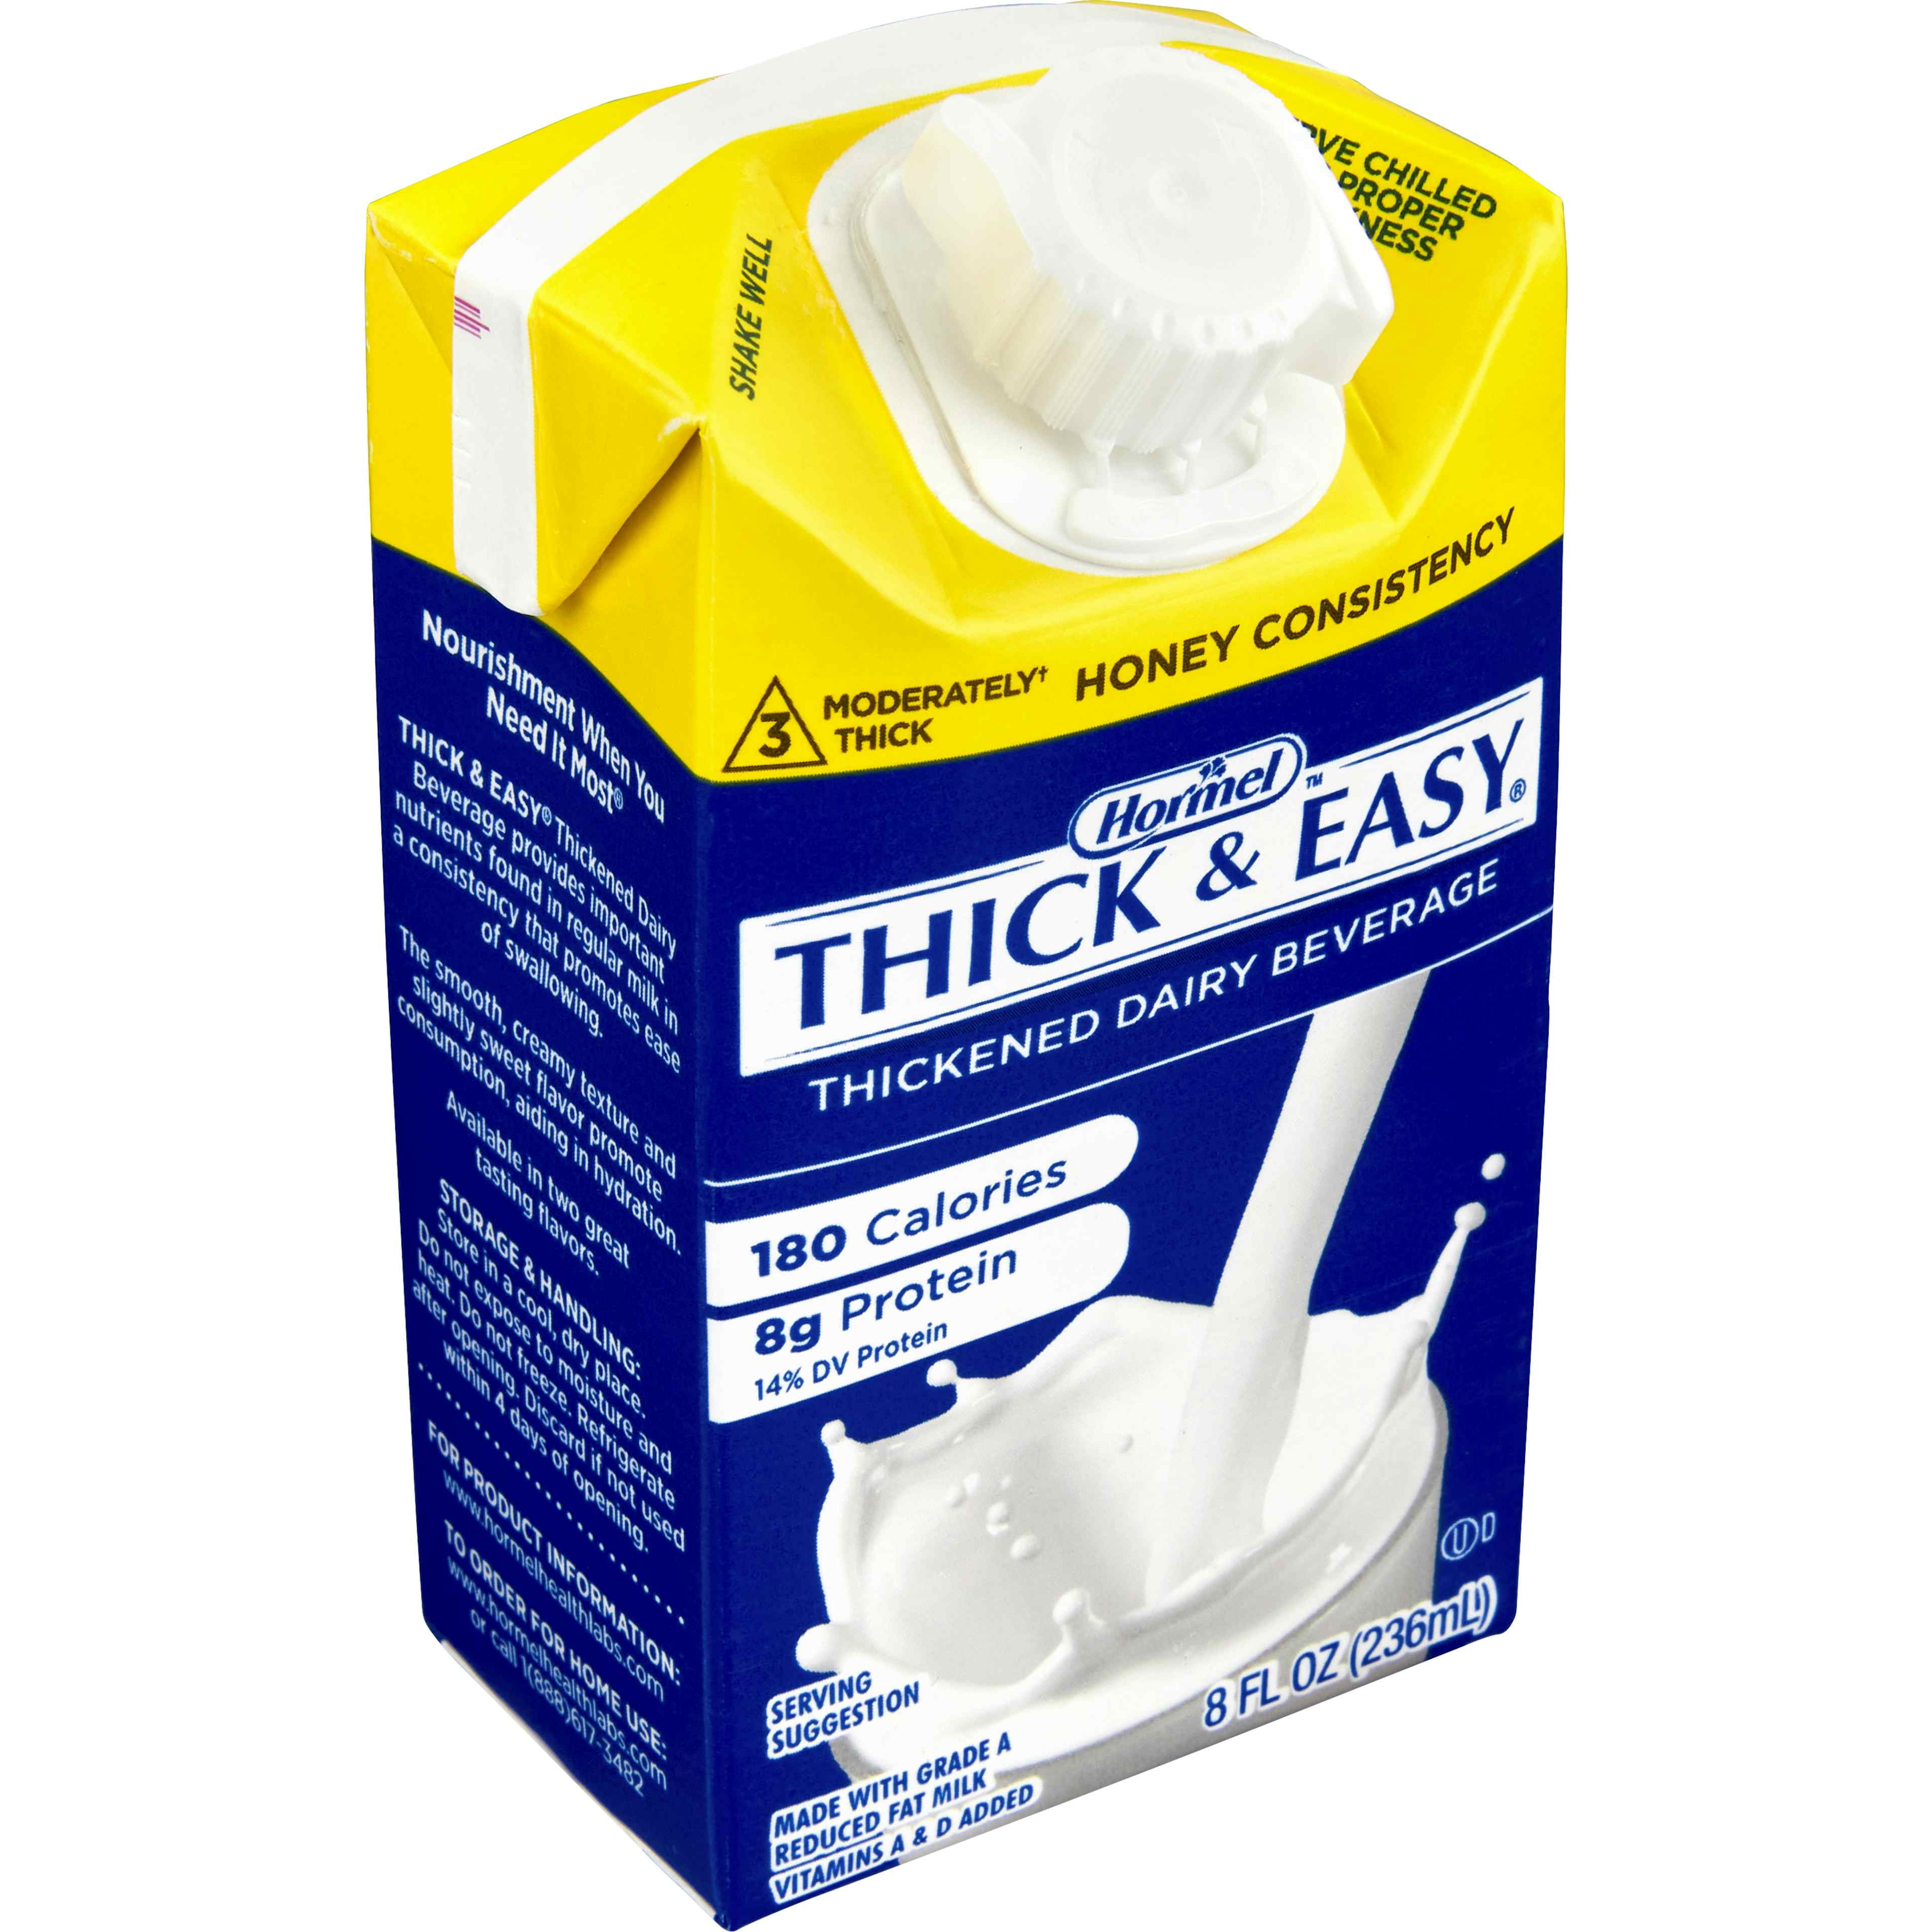 Hormel Thick & Easy Thickened Dairy Beverage, Honey Consistency, Moderately Thick